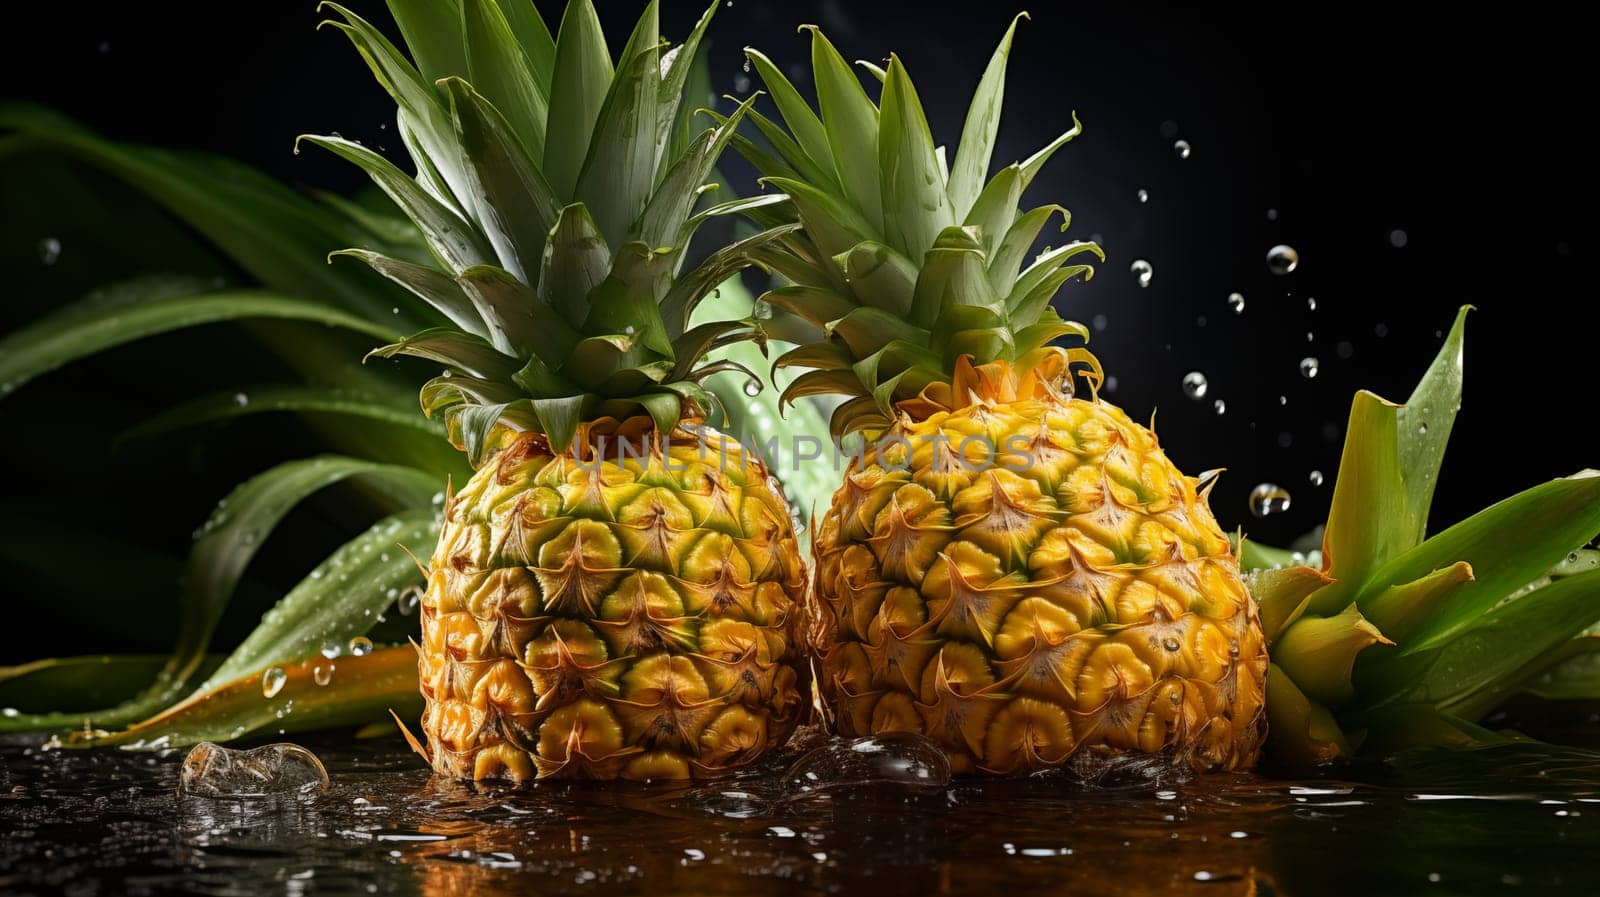 Two beautiful fresh pineapple fall in water, with splashes, black background.